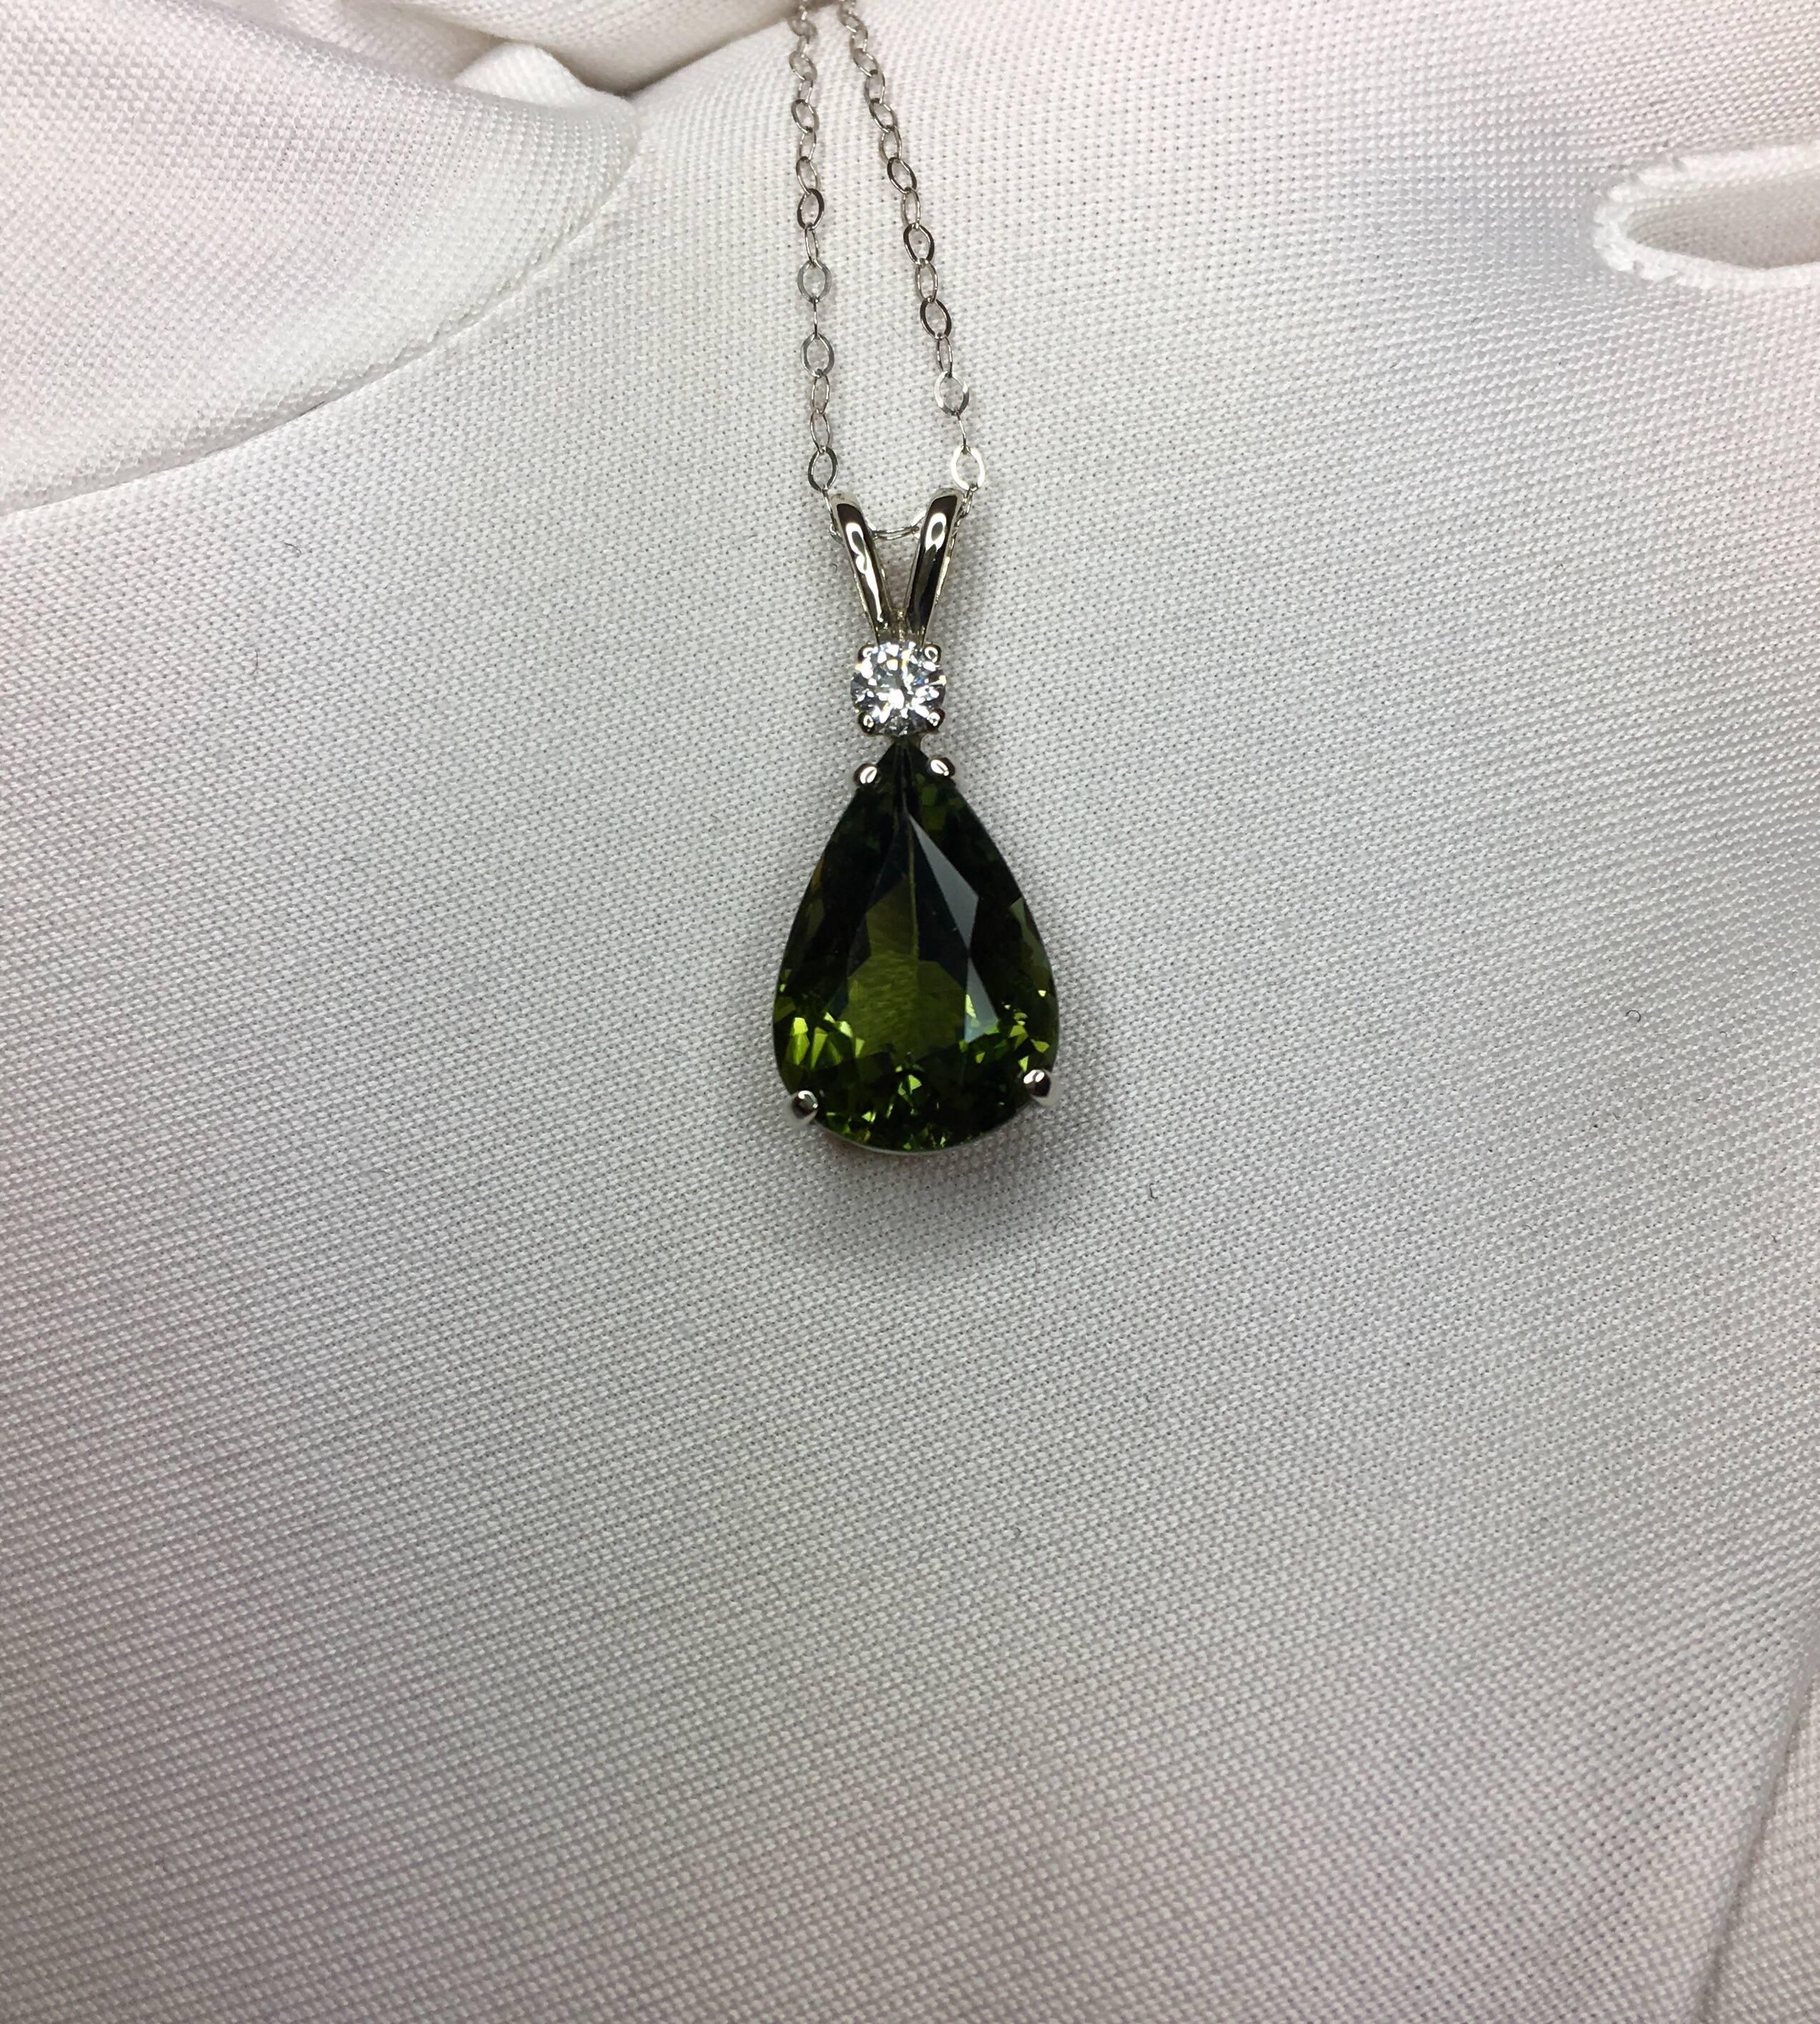 Fine natural deep green tourmaline white gold solitaire pendant with diamond accent.

Very large 4.00 carat tourmaline with a stunning deep green colour and very good clarity.

Good quality green tourmalines of this size and quality are rare stones.